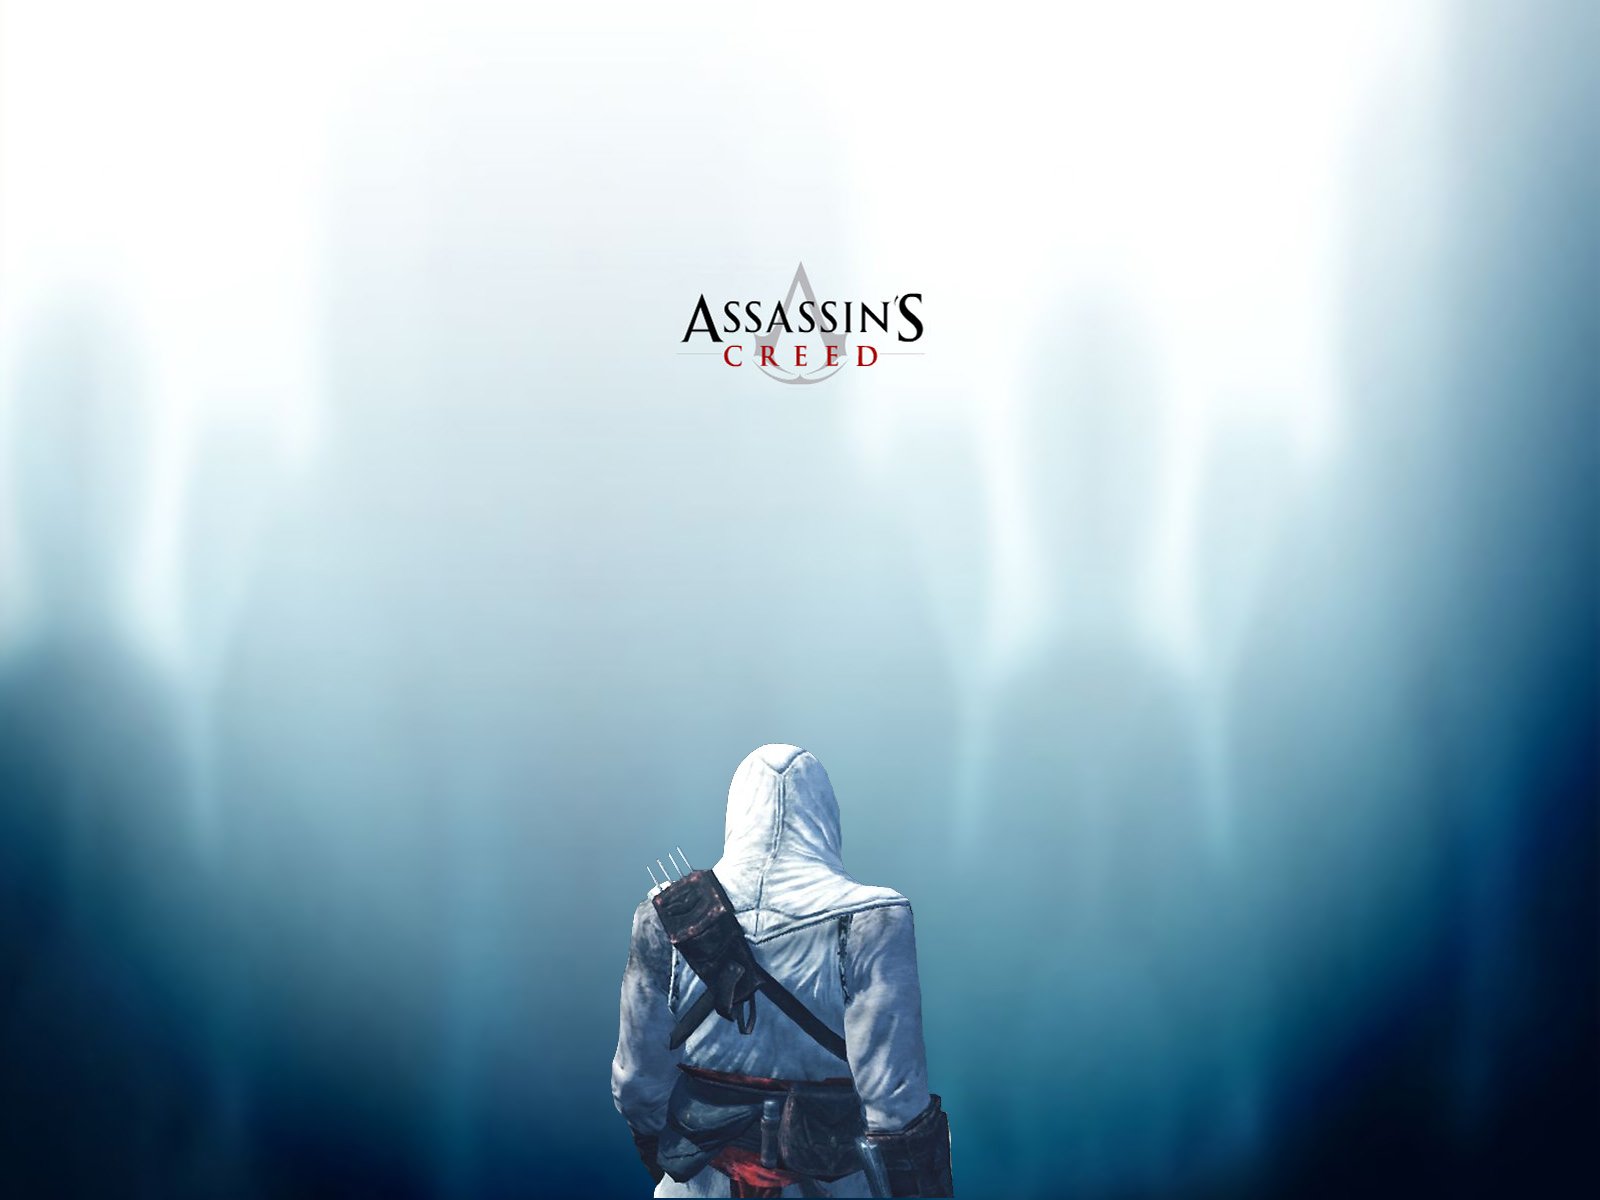 altair, Assassinand039s, Creed Wallpaper